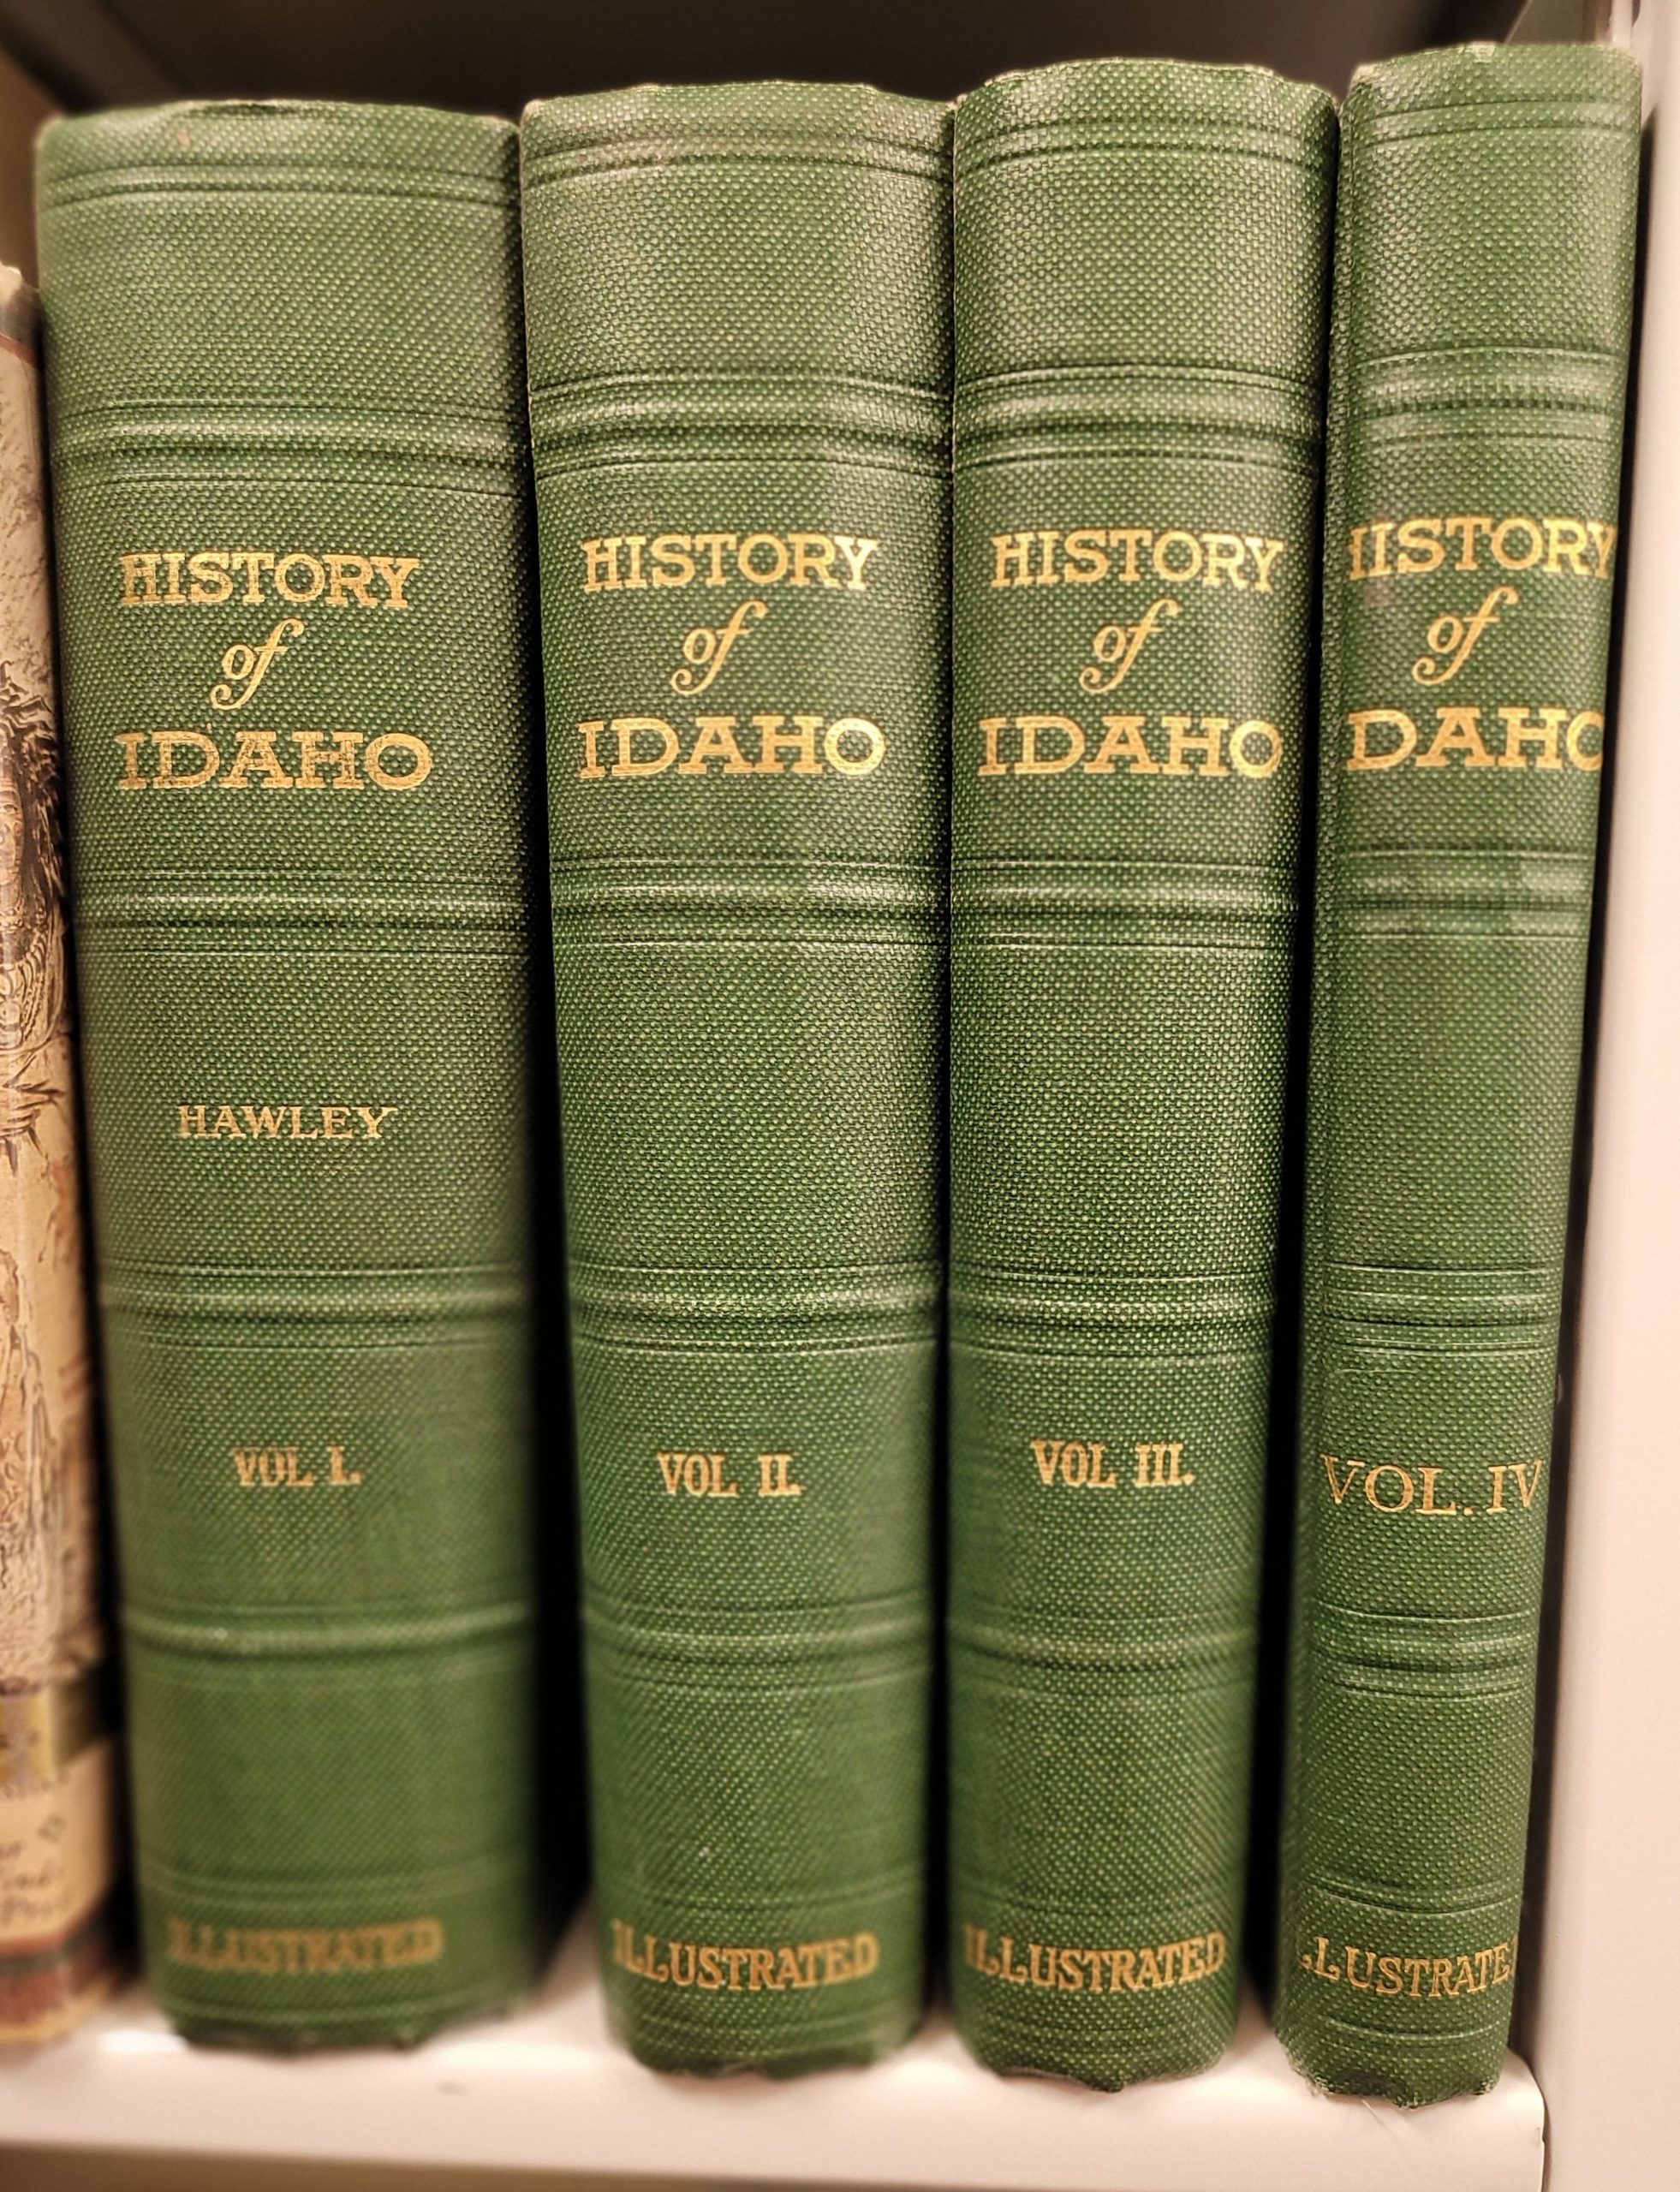 History of Idaho book collection CRH